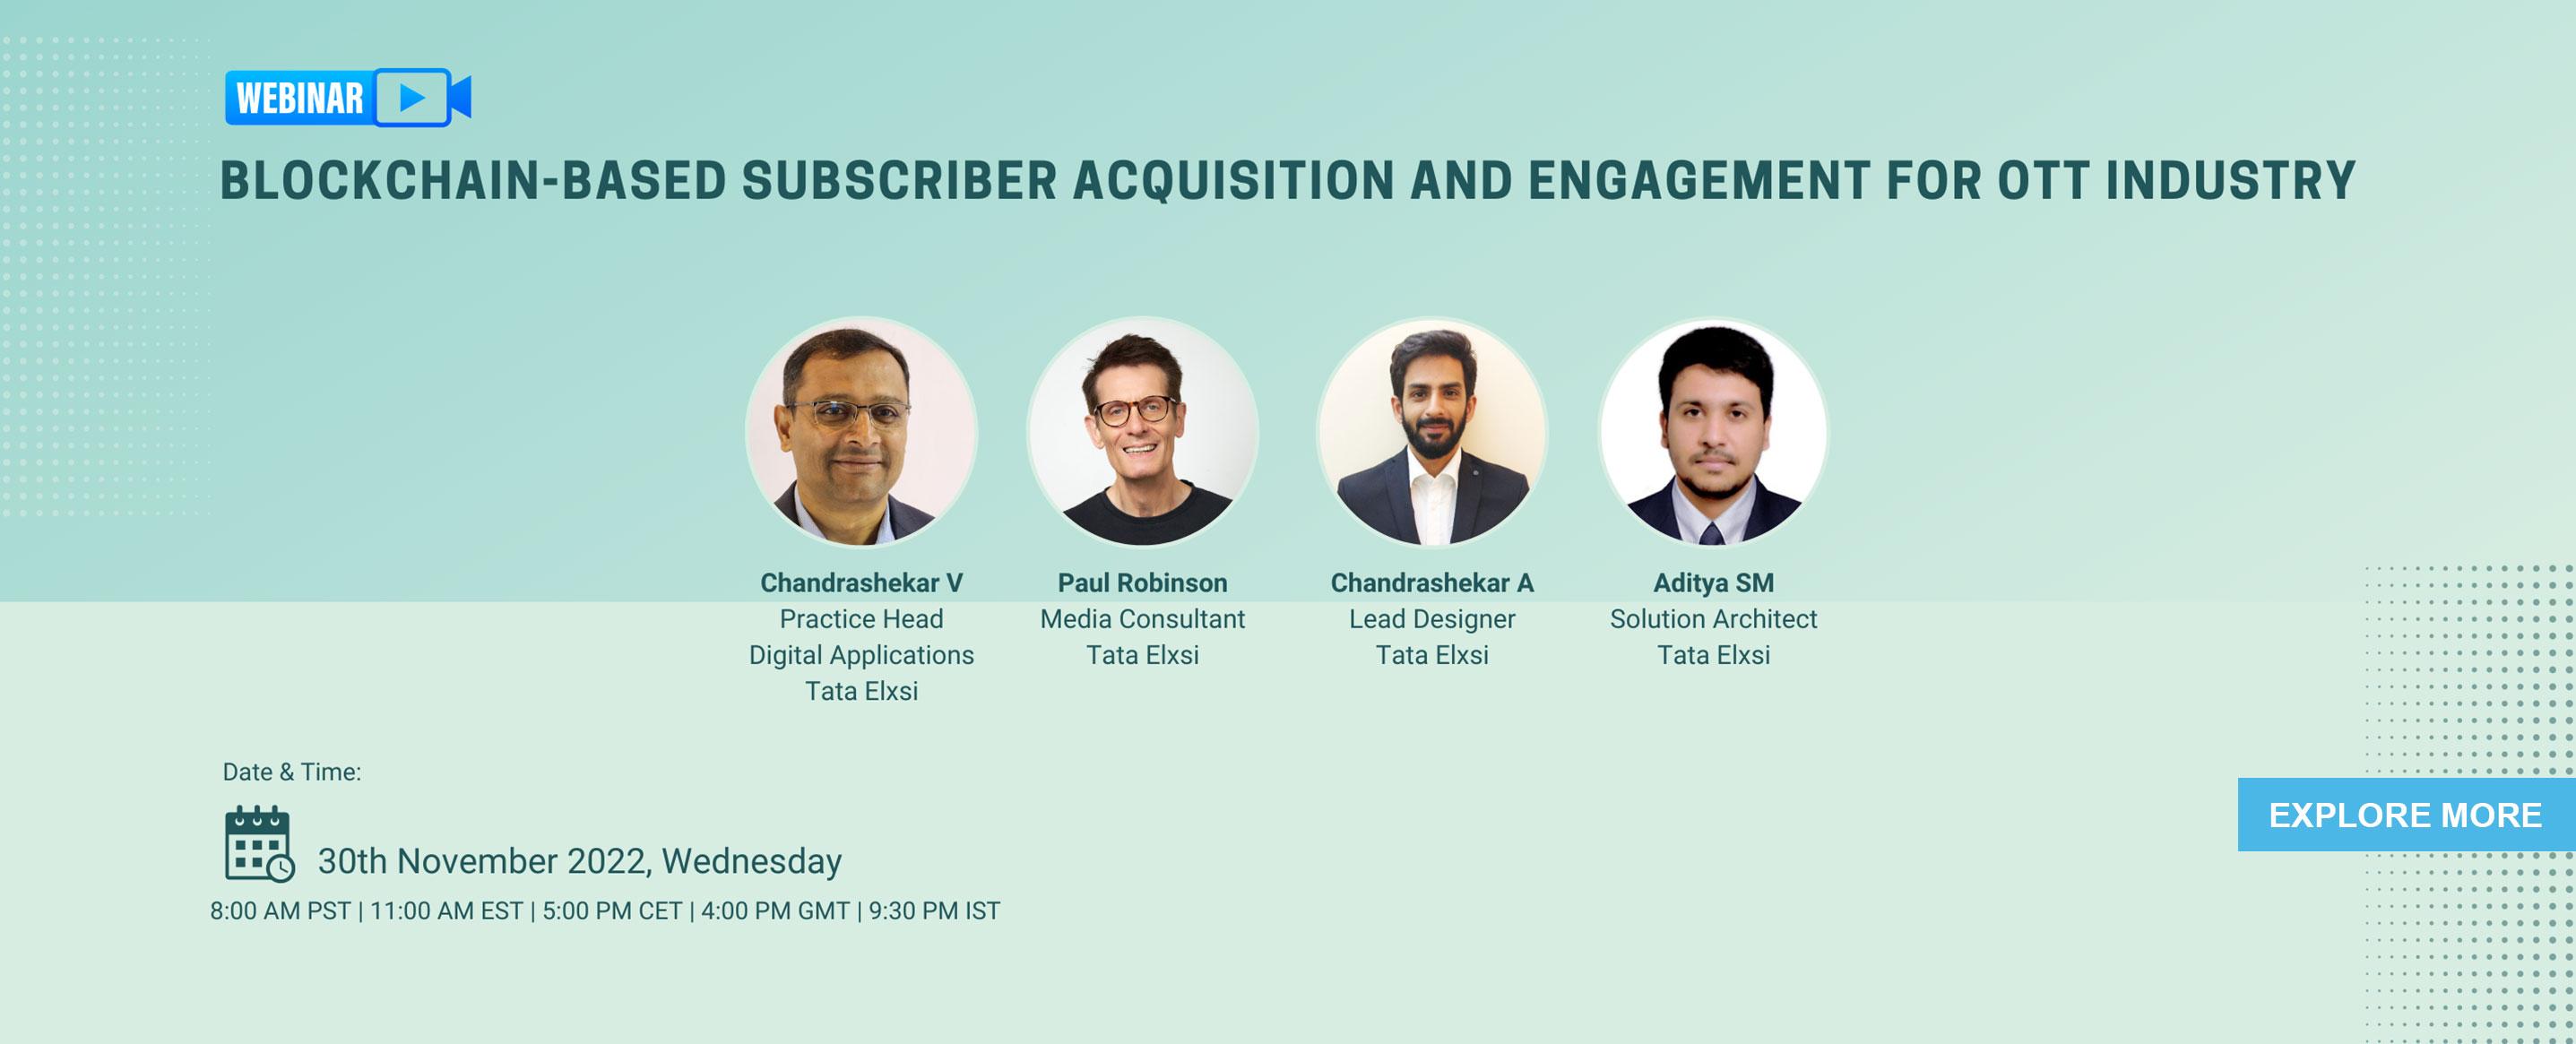 Blockchain-based subscriber acquisition and engagement for OTT industry